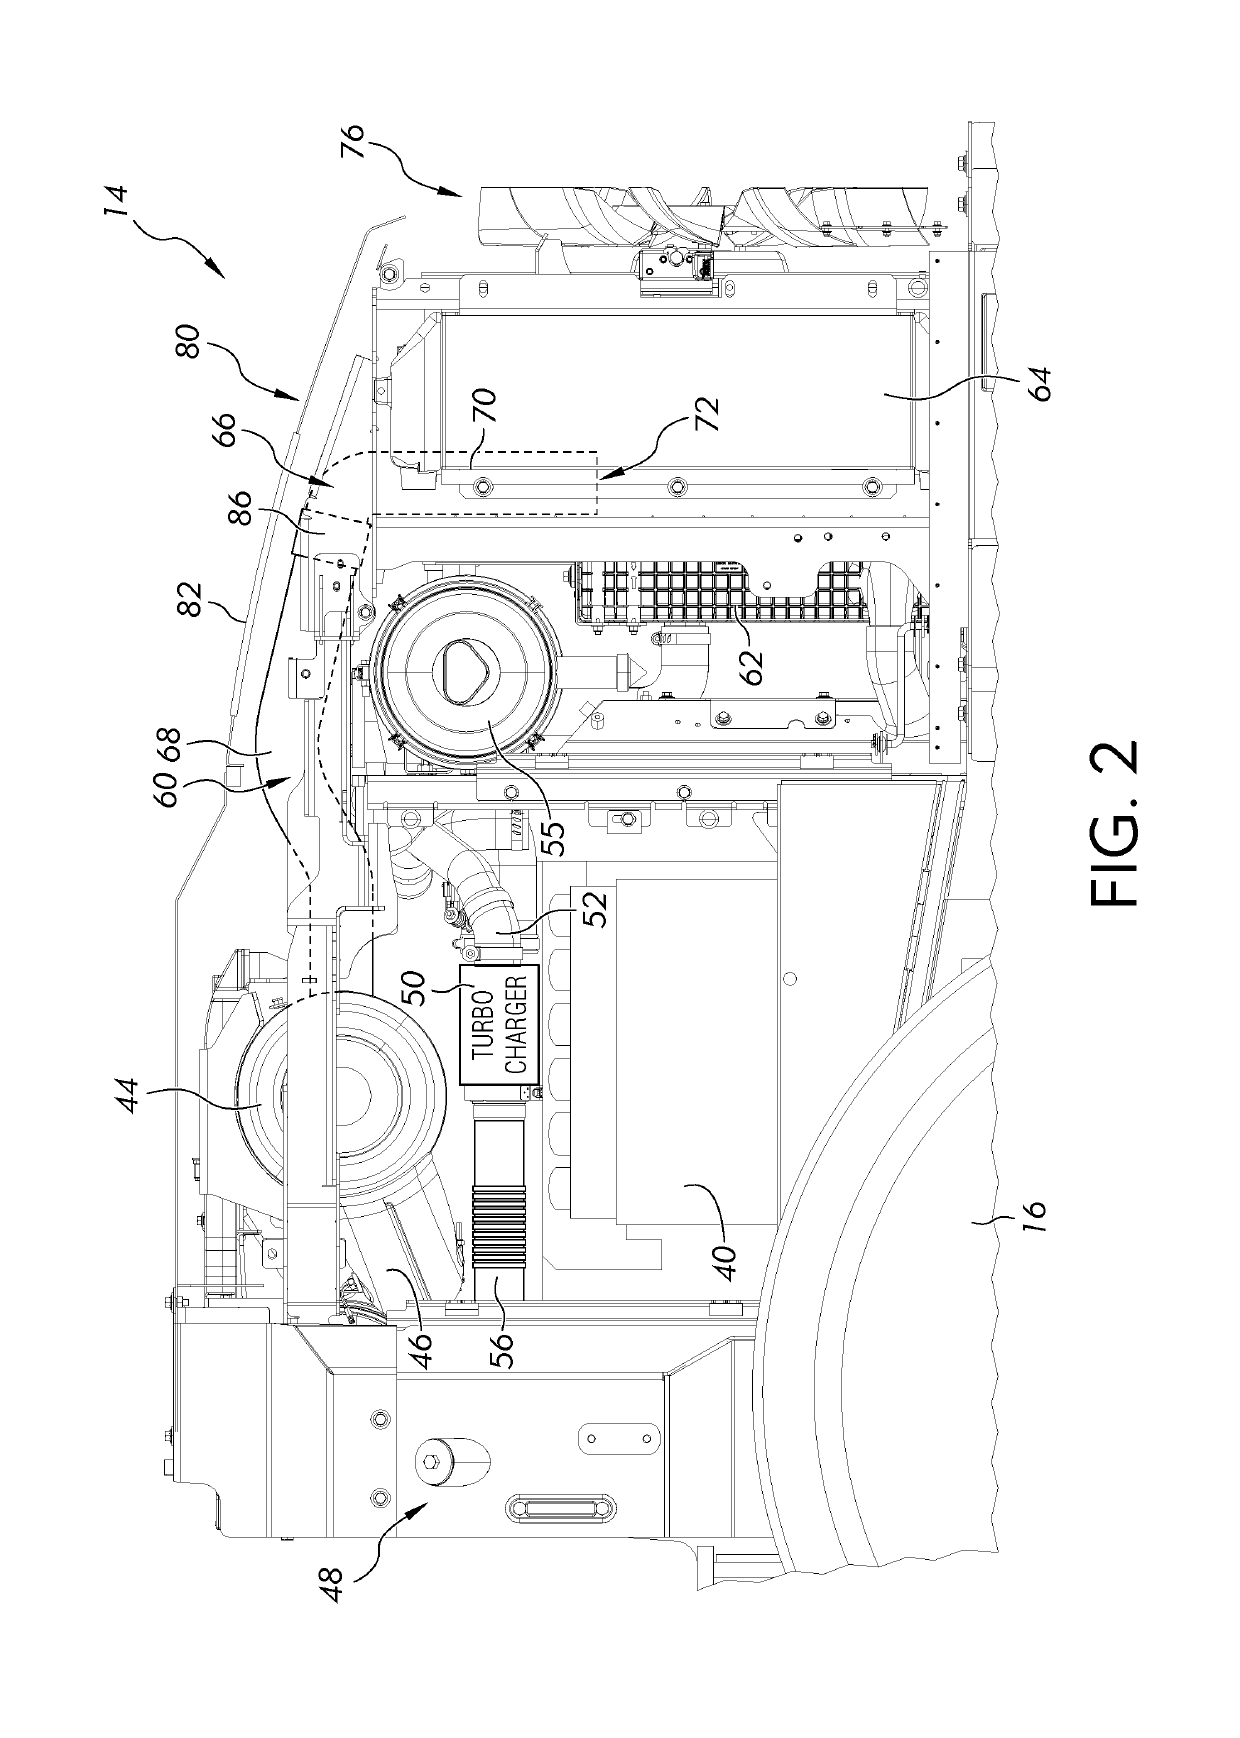 Method of removal of engine exhaust from a work machine and system thereof